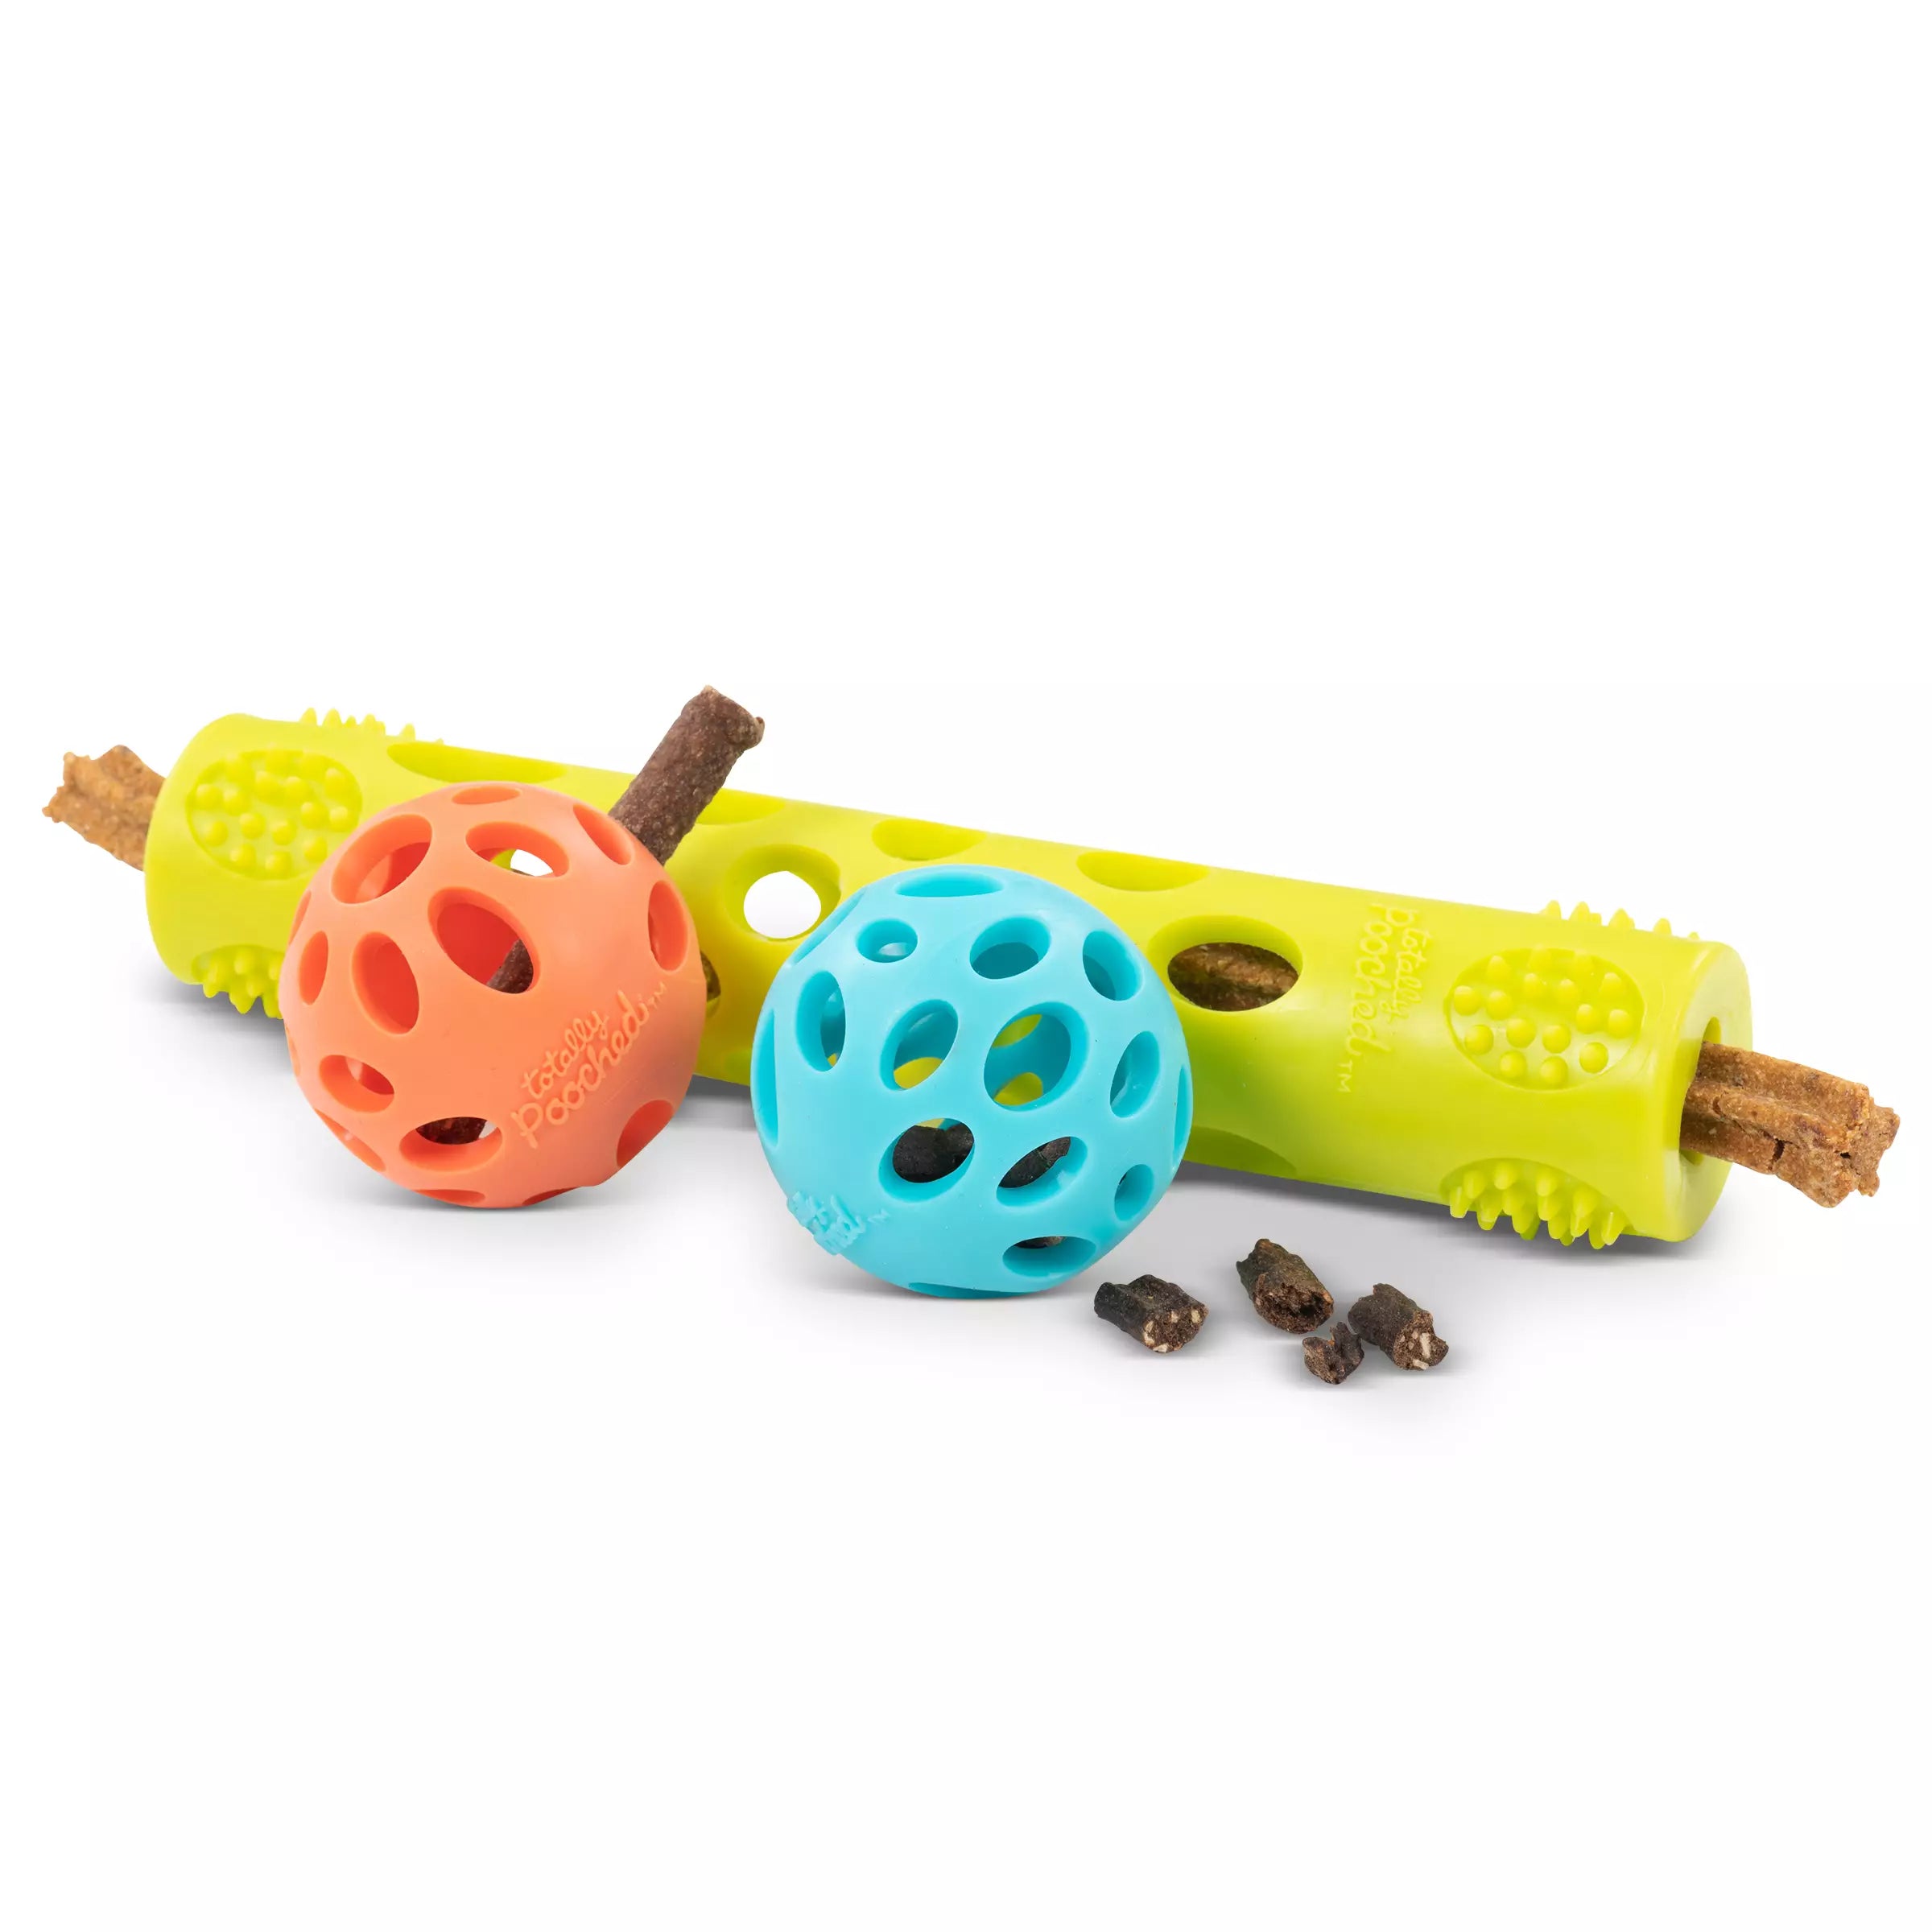 Totally Pooched - Huff'n Puff Rubber Ball & Stick Set 3pc